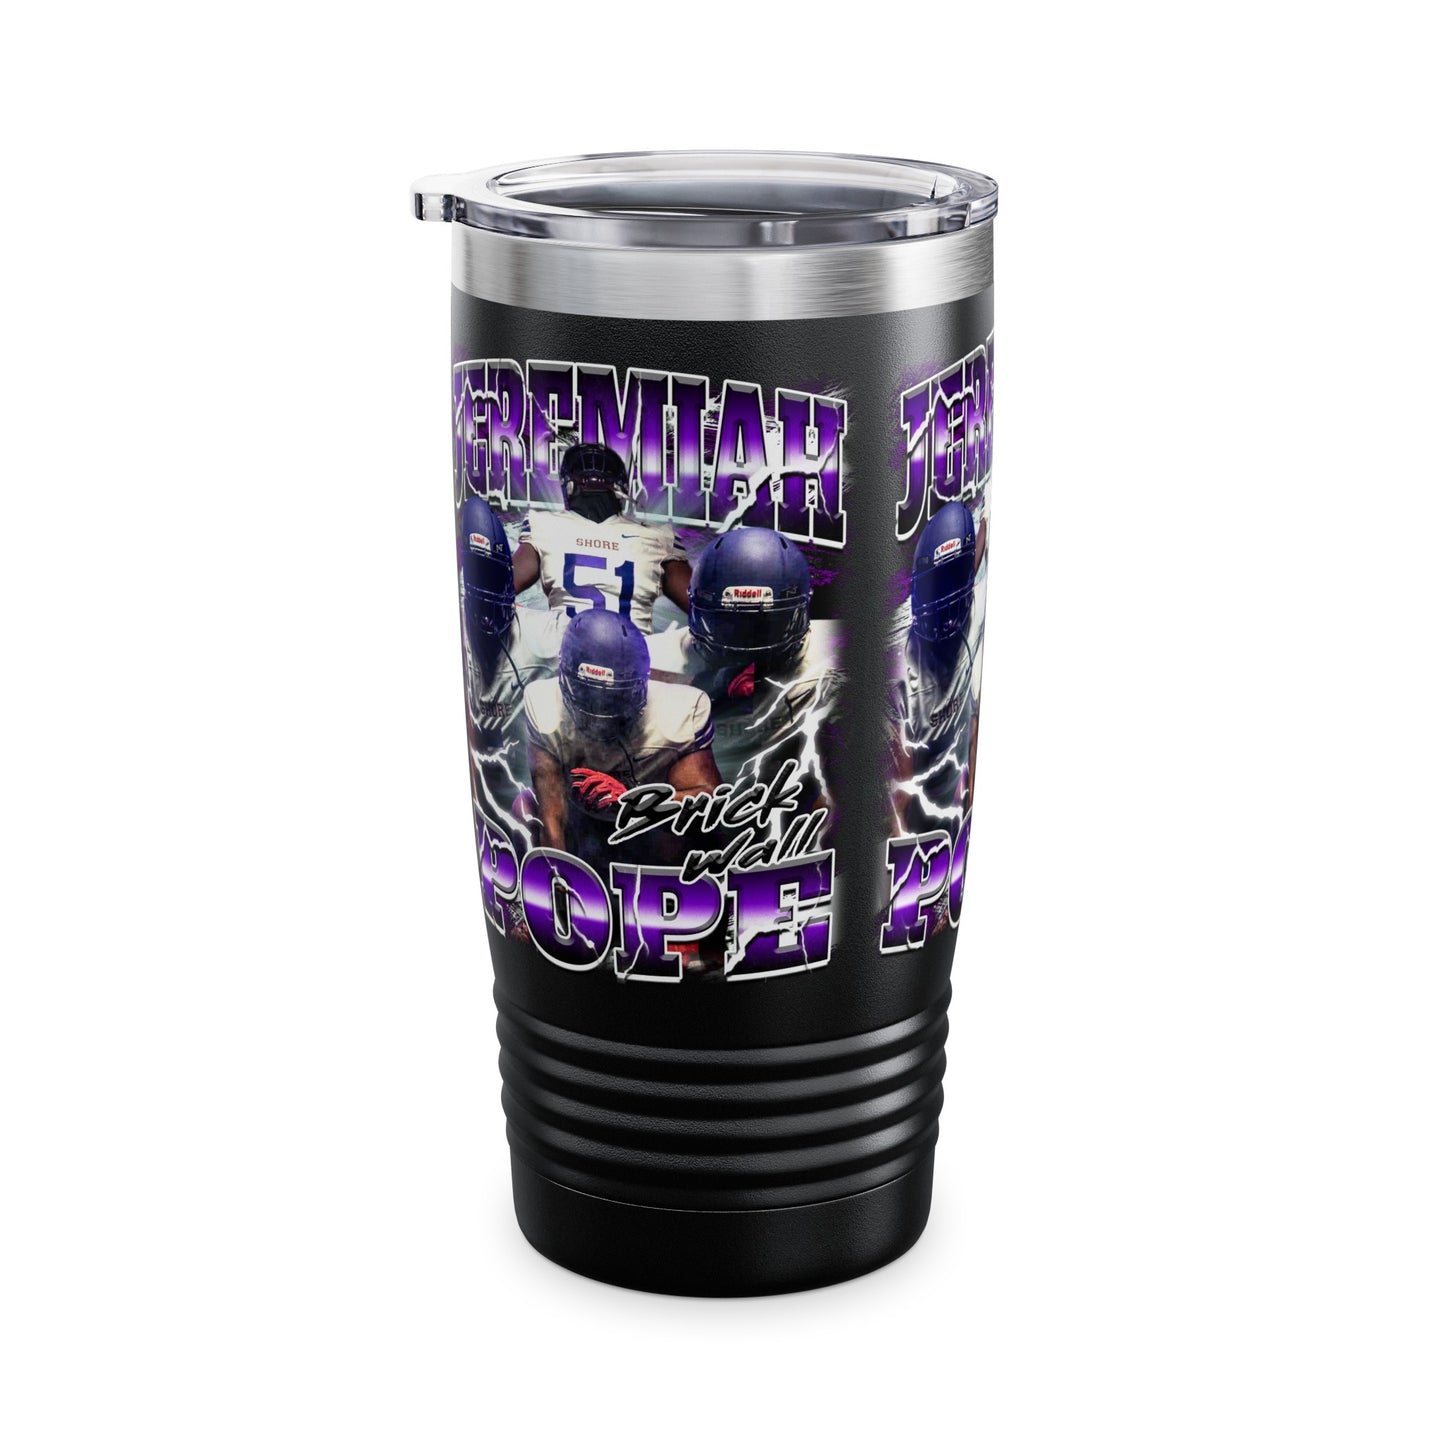 Jeremiah Pope Stainless Steal Tumbler